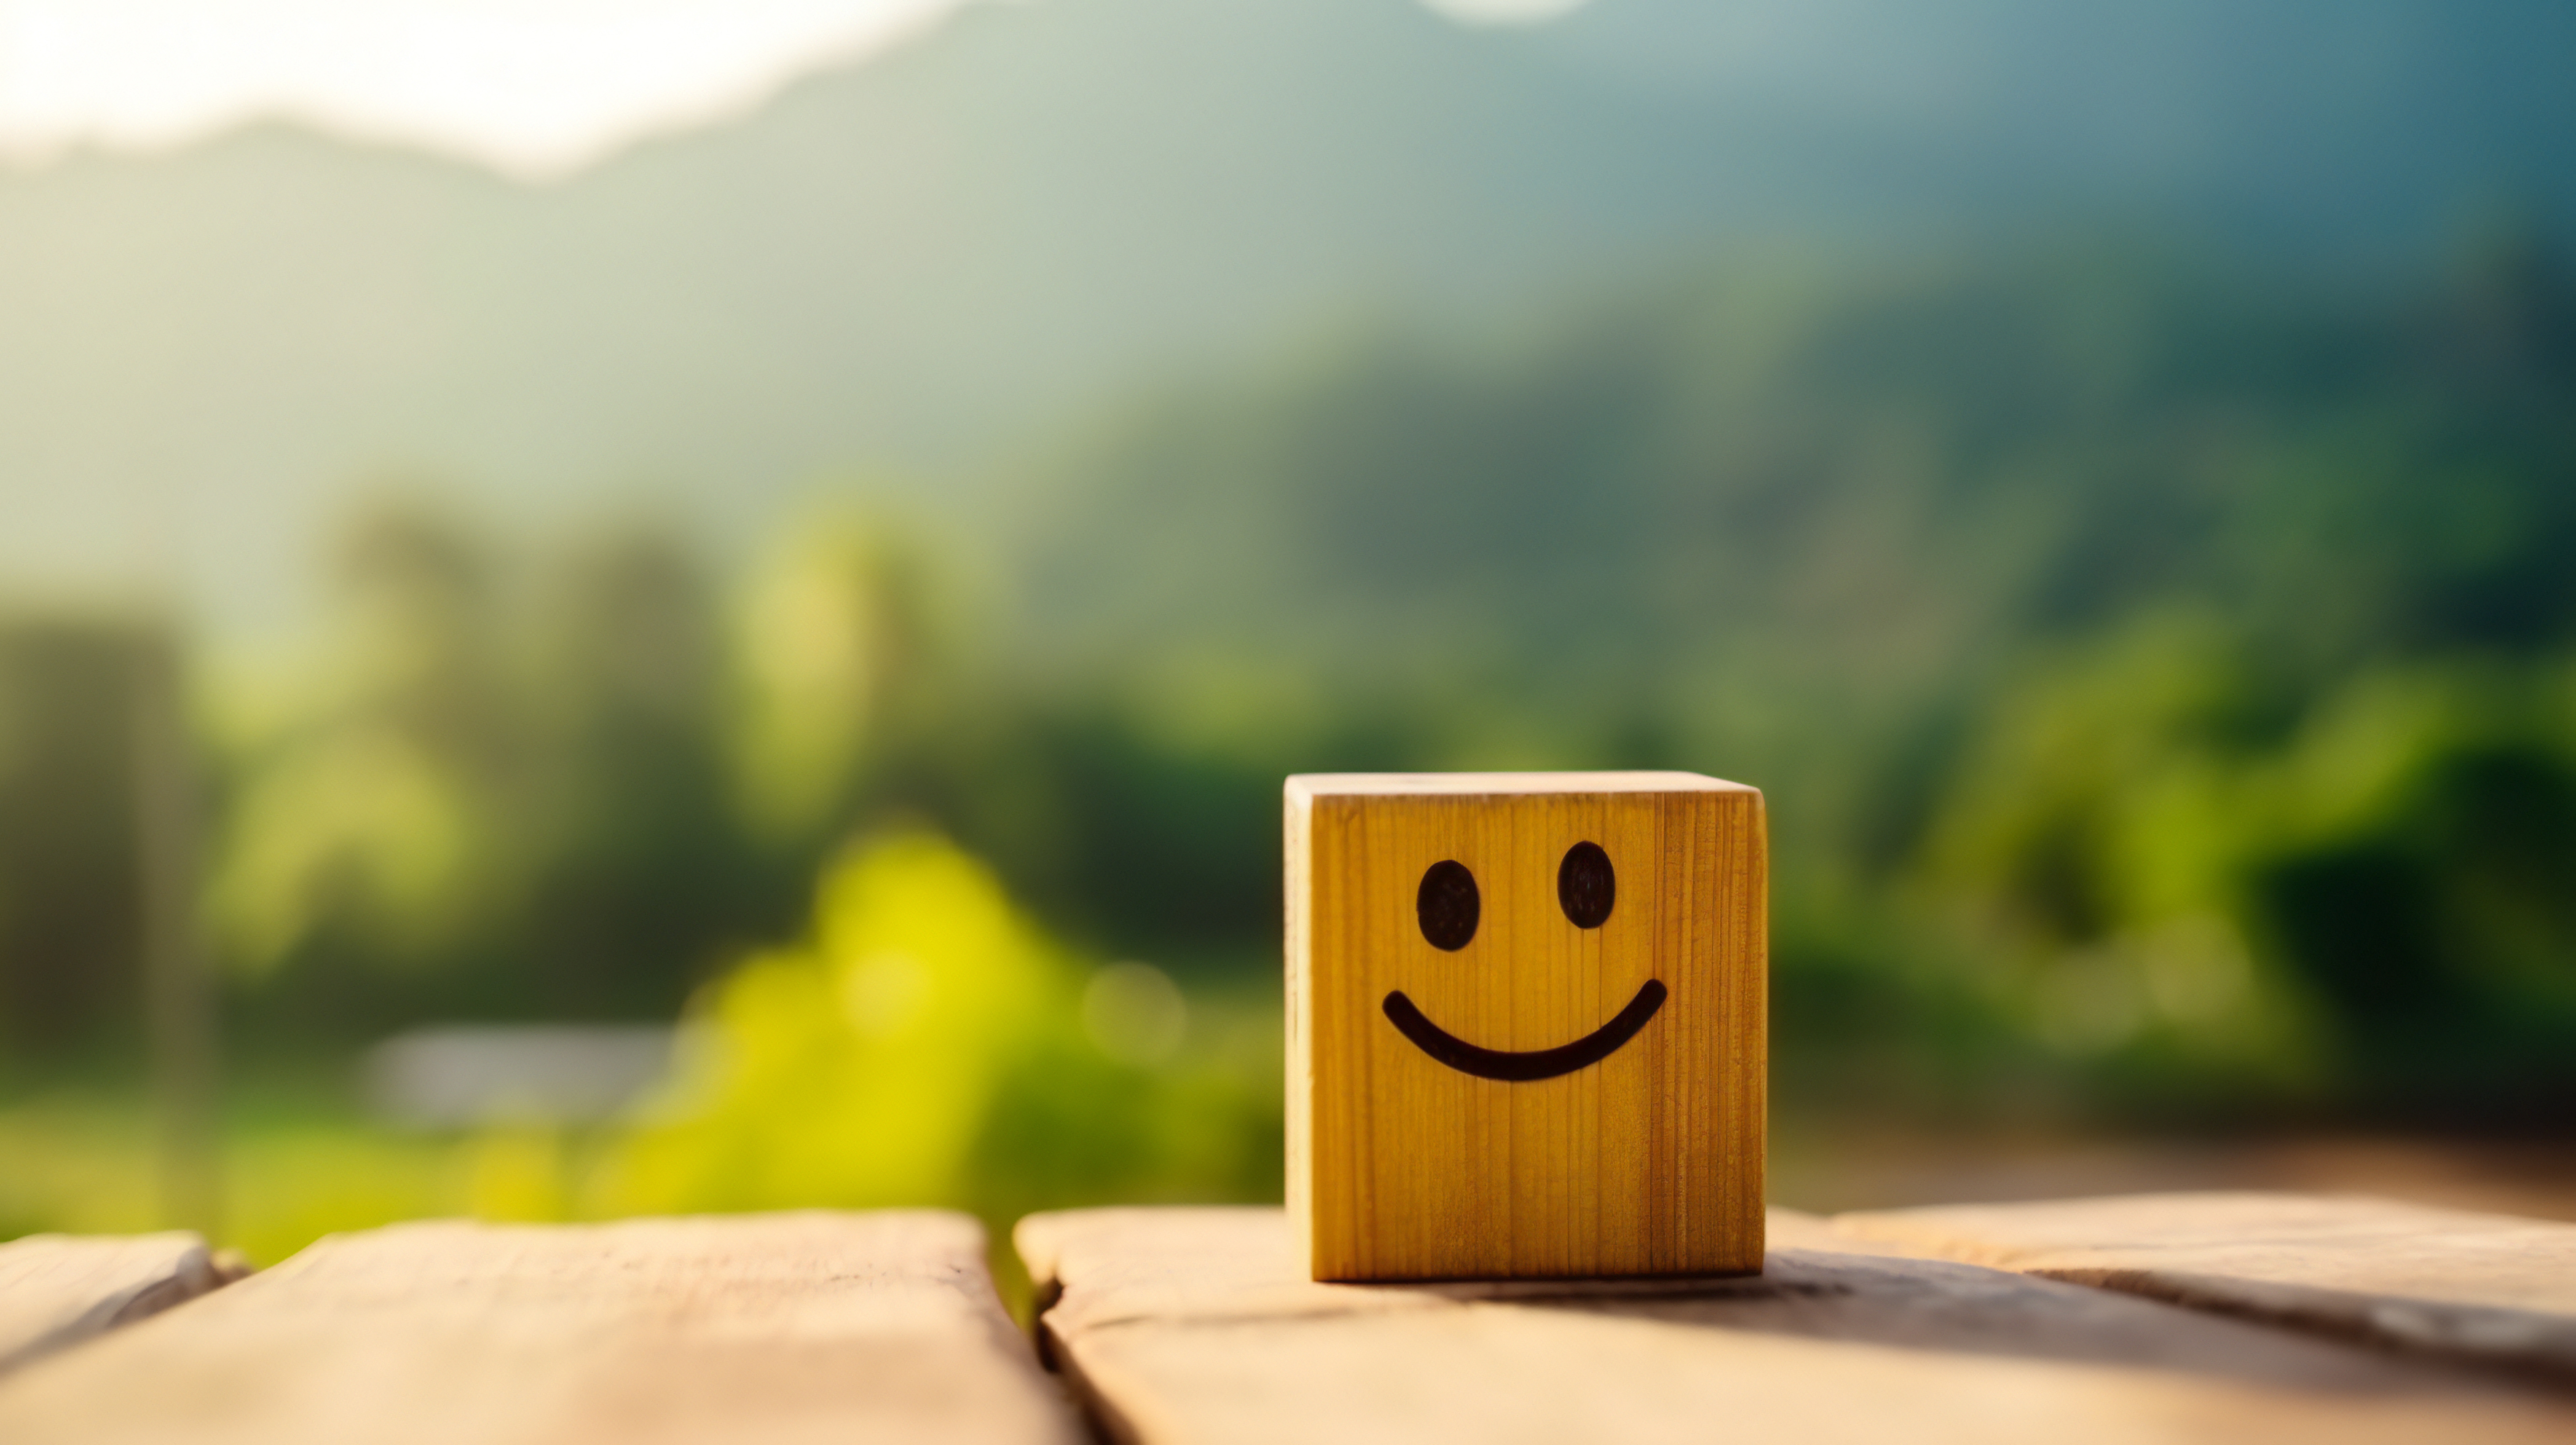 Small block of wood with a drawn smiley face on outdoor table